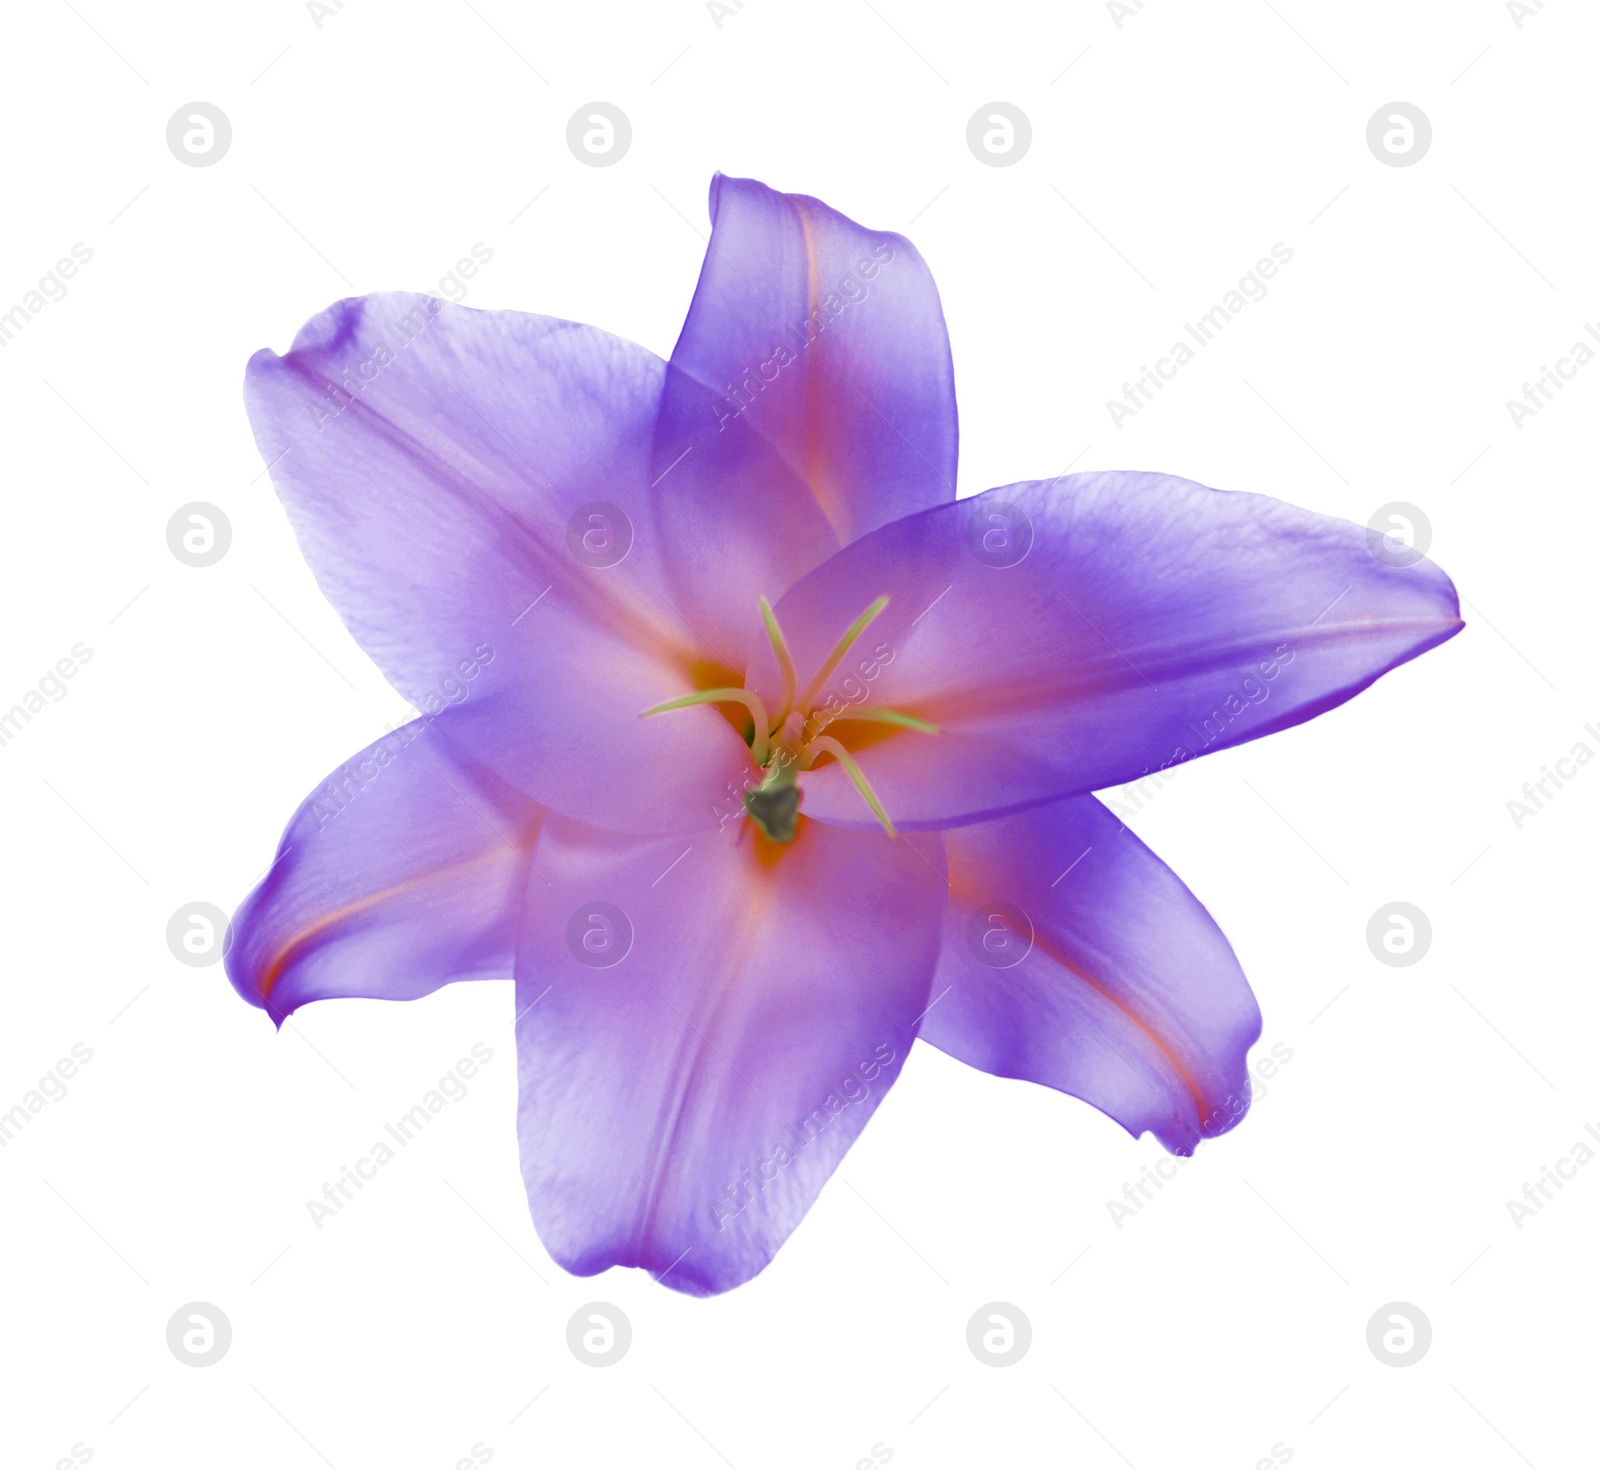 Image of Amazing violet lily flower isolated on white